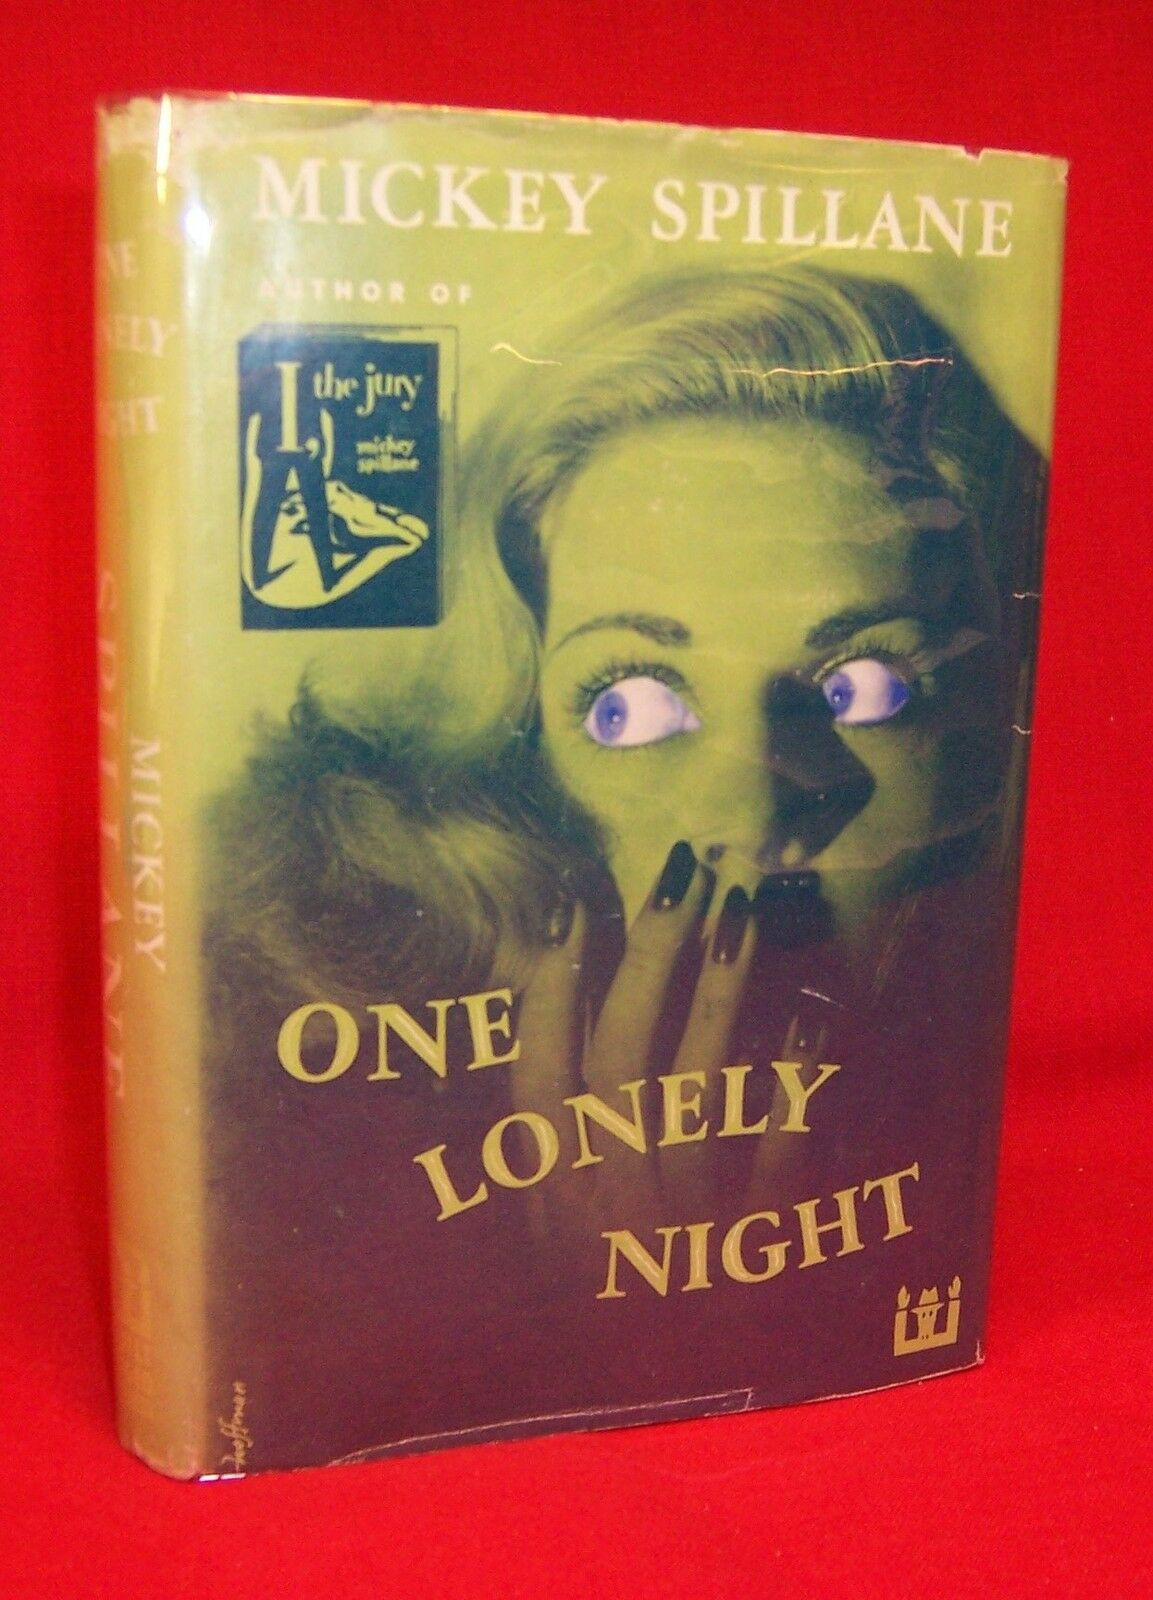 Primary image for Mickey Spillane ONE LONELY NIGHT First Edition Hard-Boiled Classic Mystery in dj